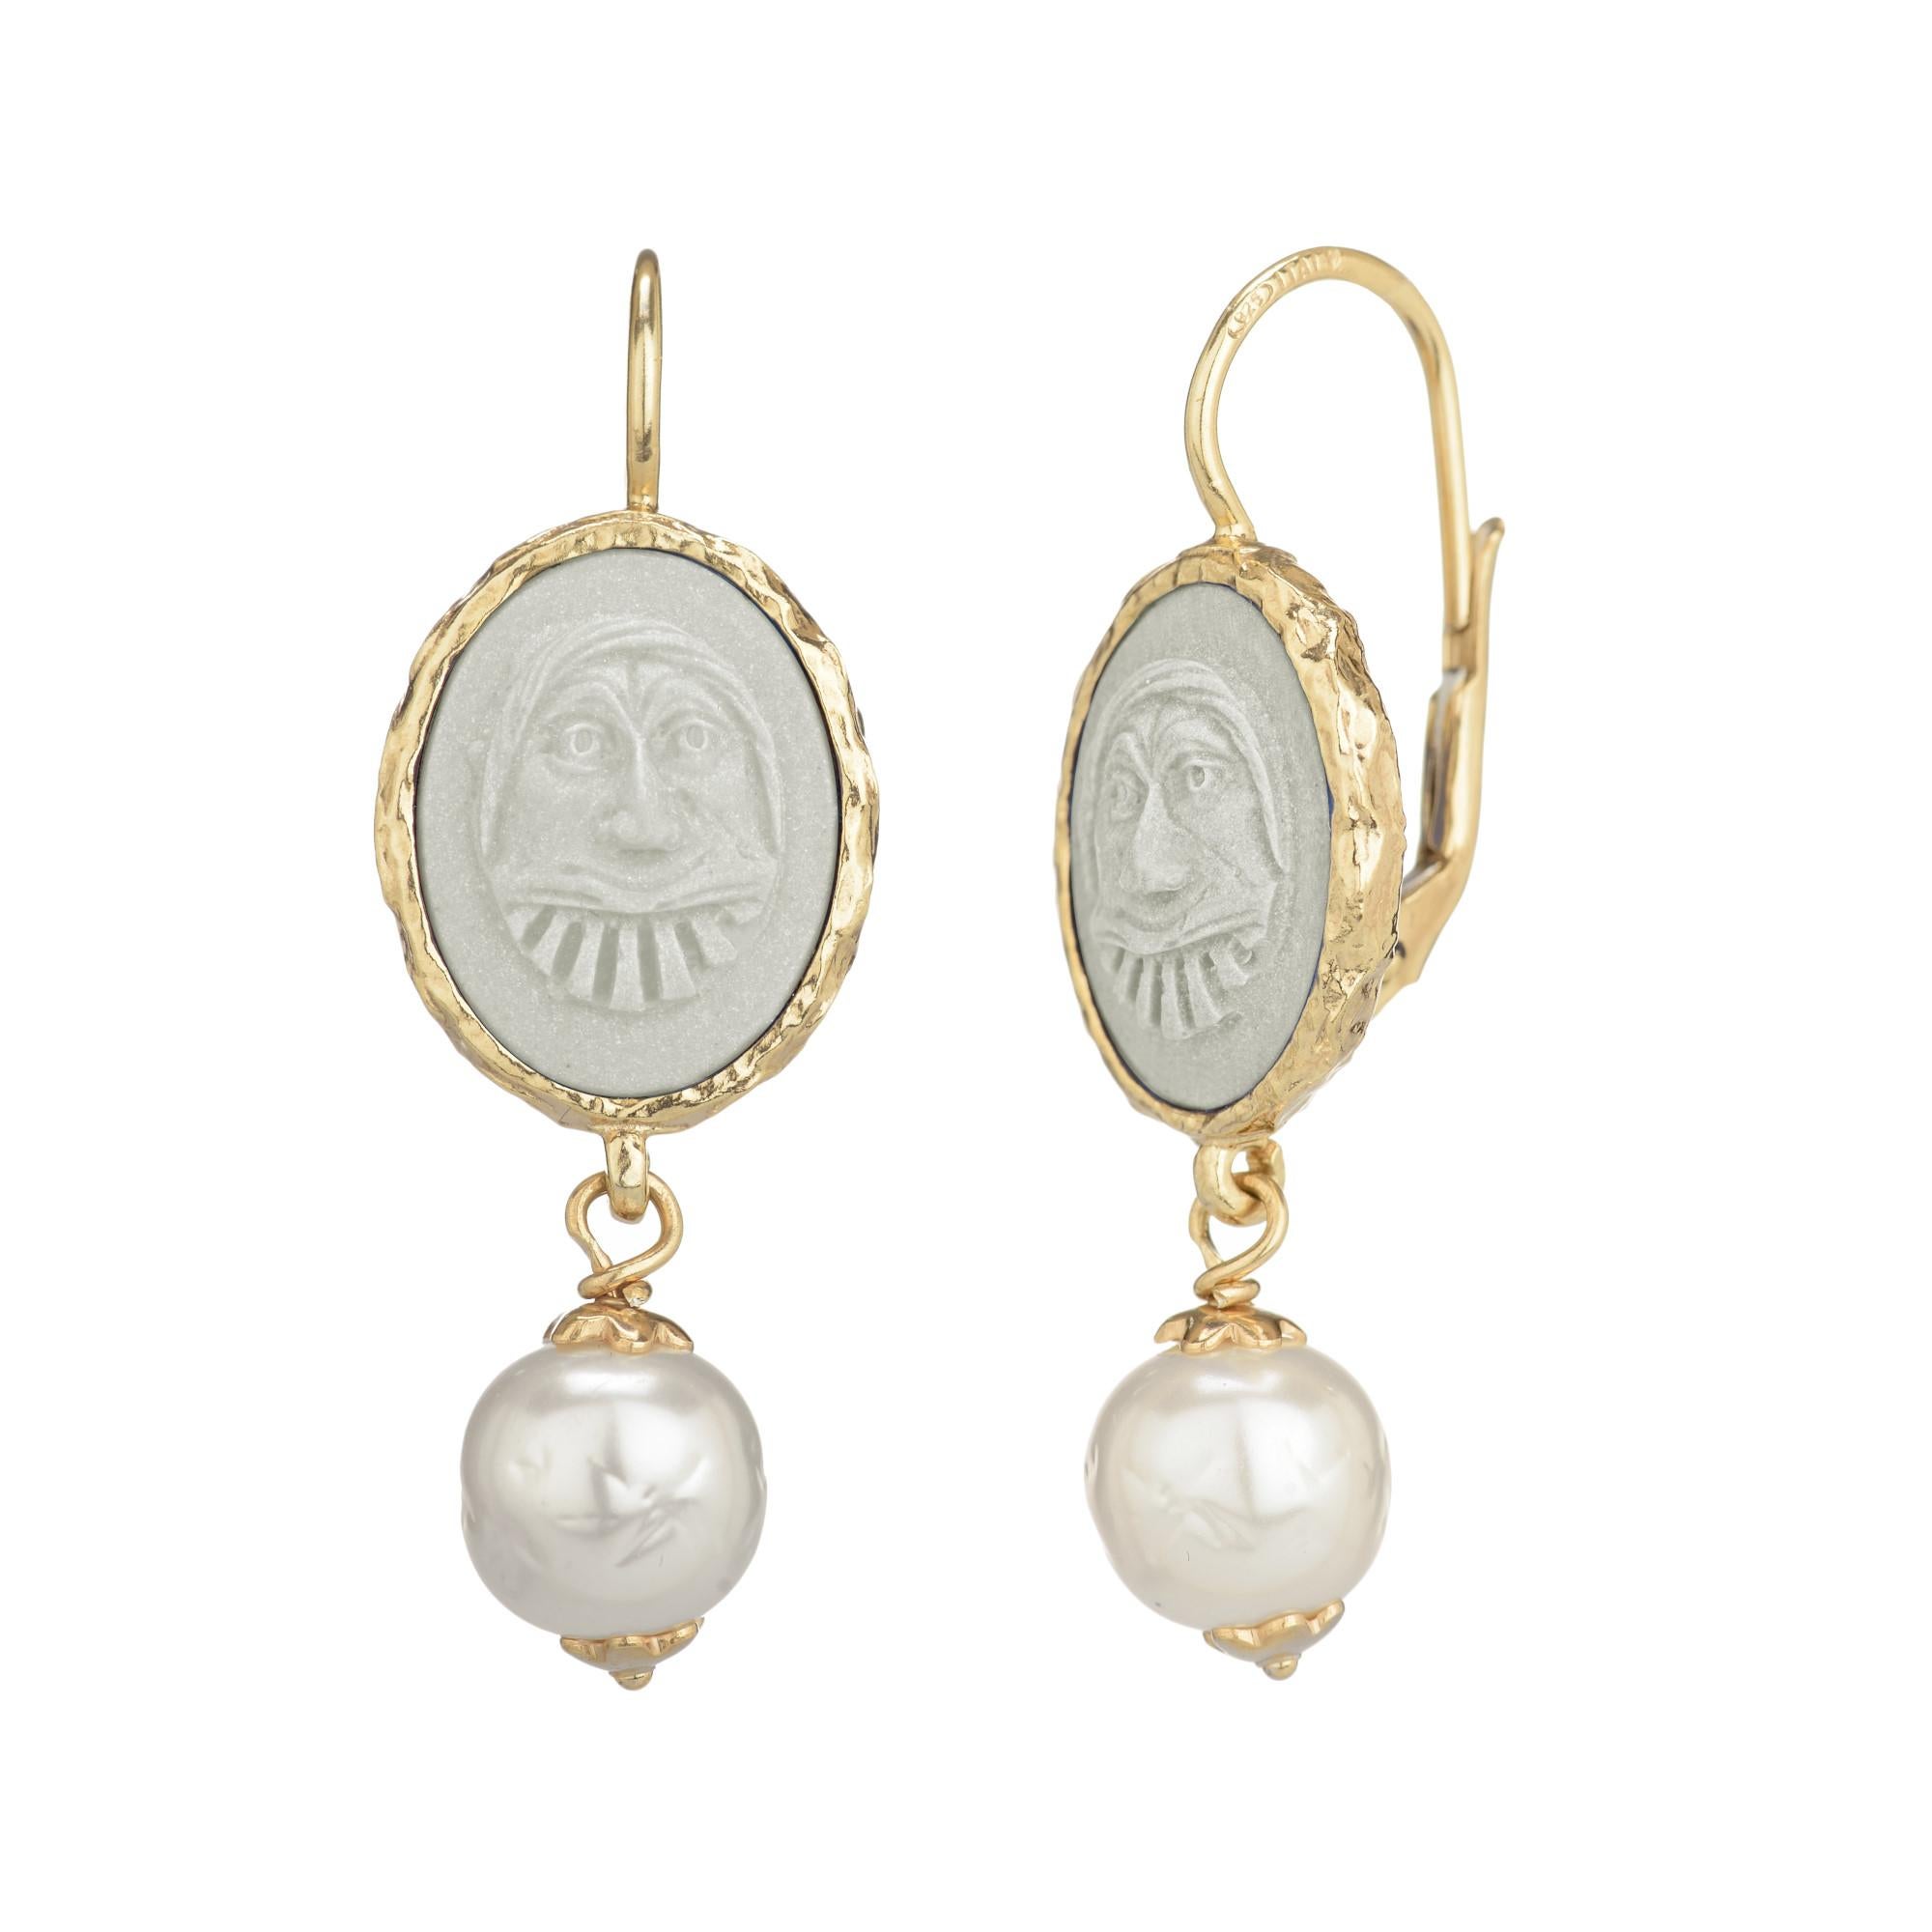 Beautifully hand crafted porcelain cameo earrings mounted in 18k gold vermeil showcasing a pair of Greek masks in ancient greek theatre and enriched by two elegant baroque pearls. In times past, cameos were mainly made of shells, hardstones, coral